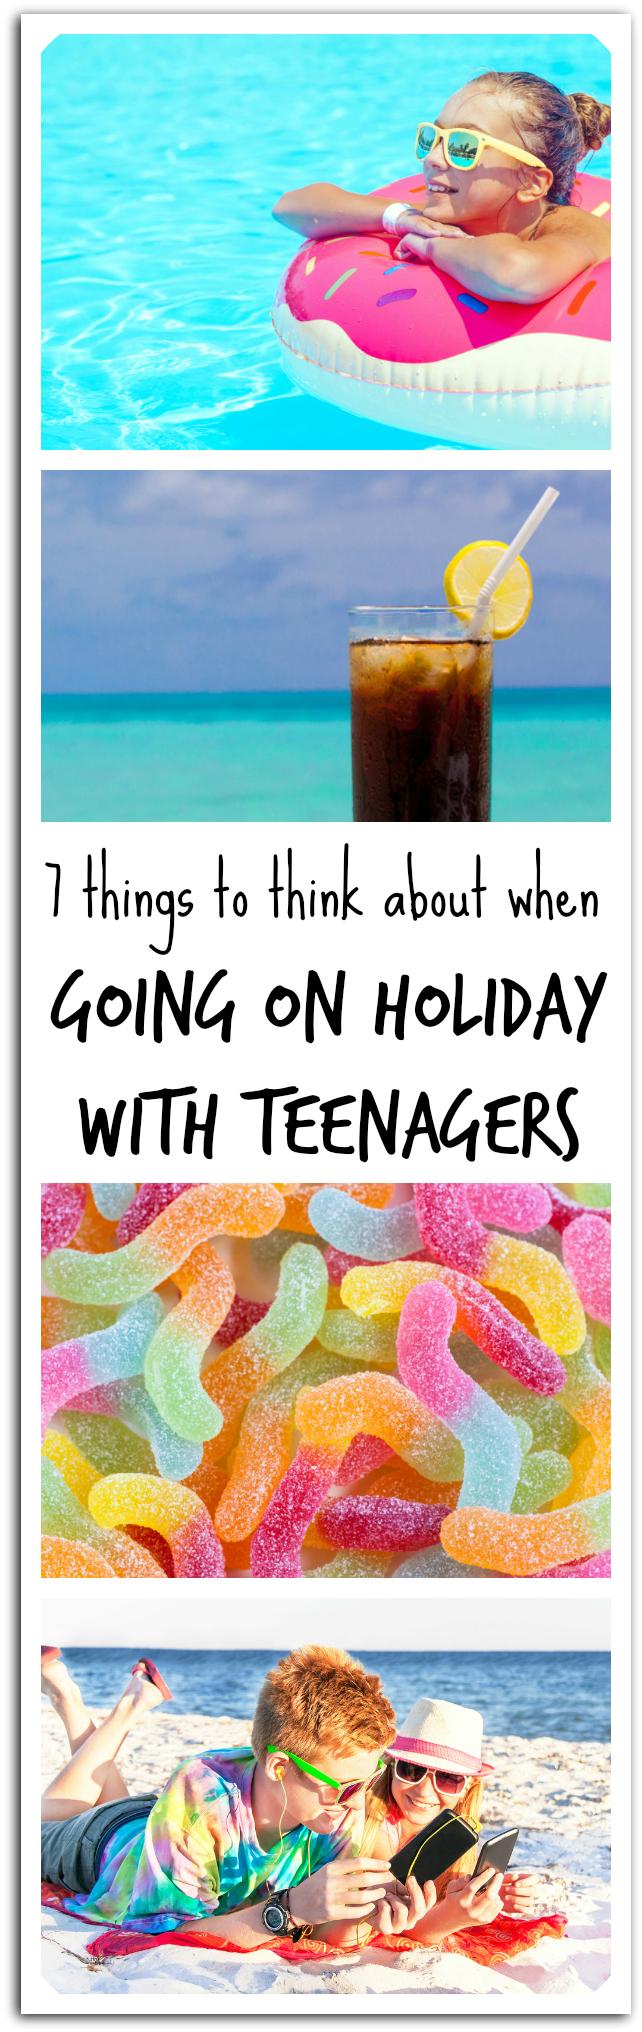 tips for holidays with teenagers